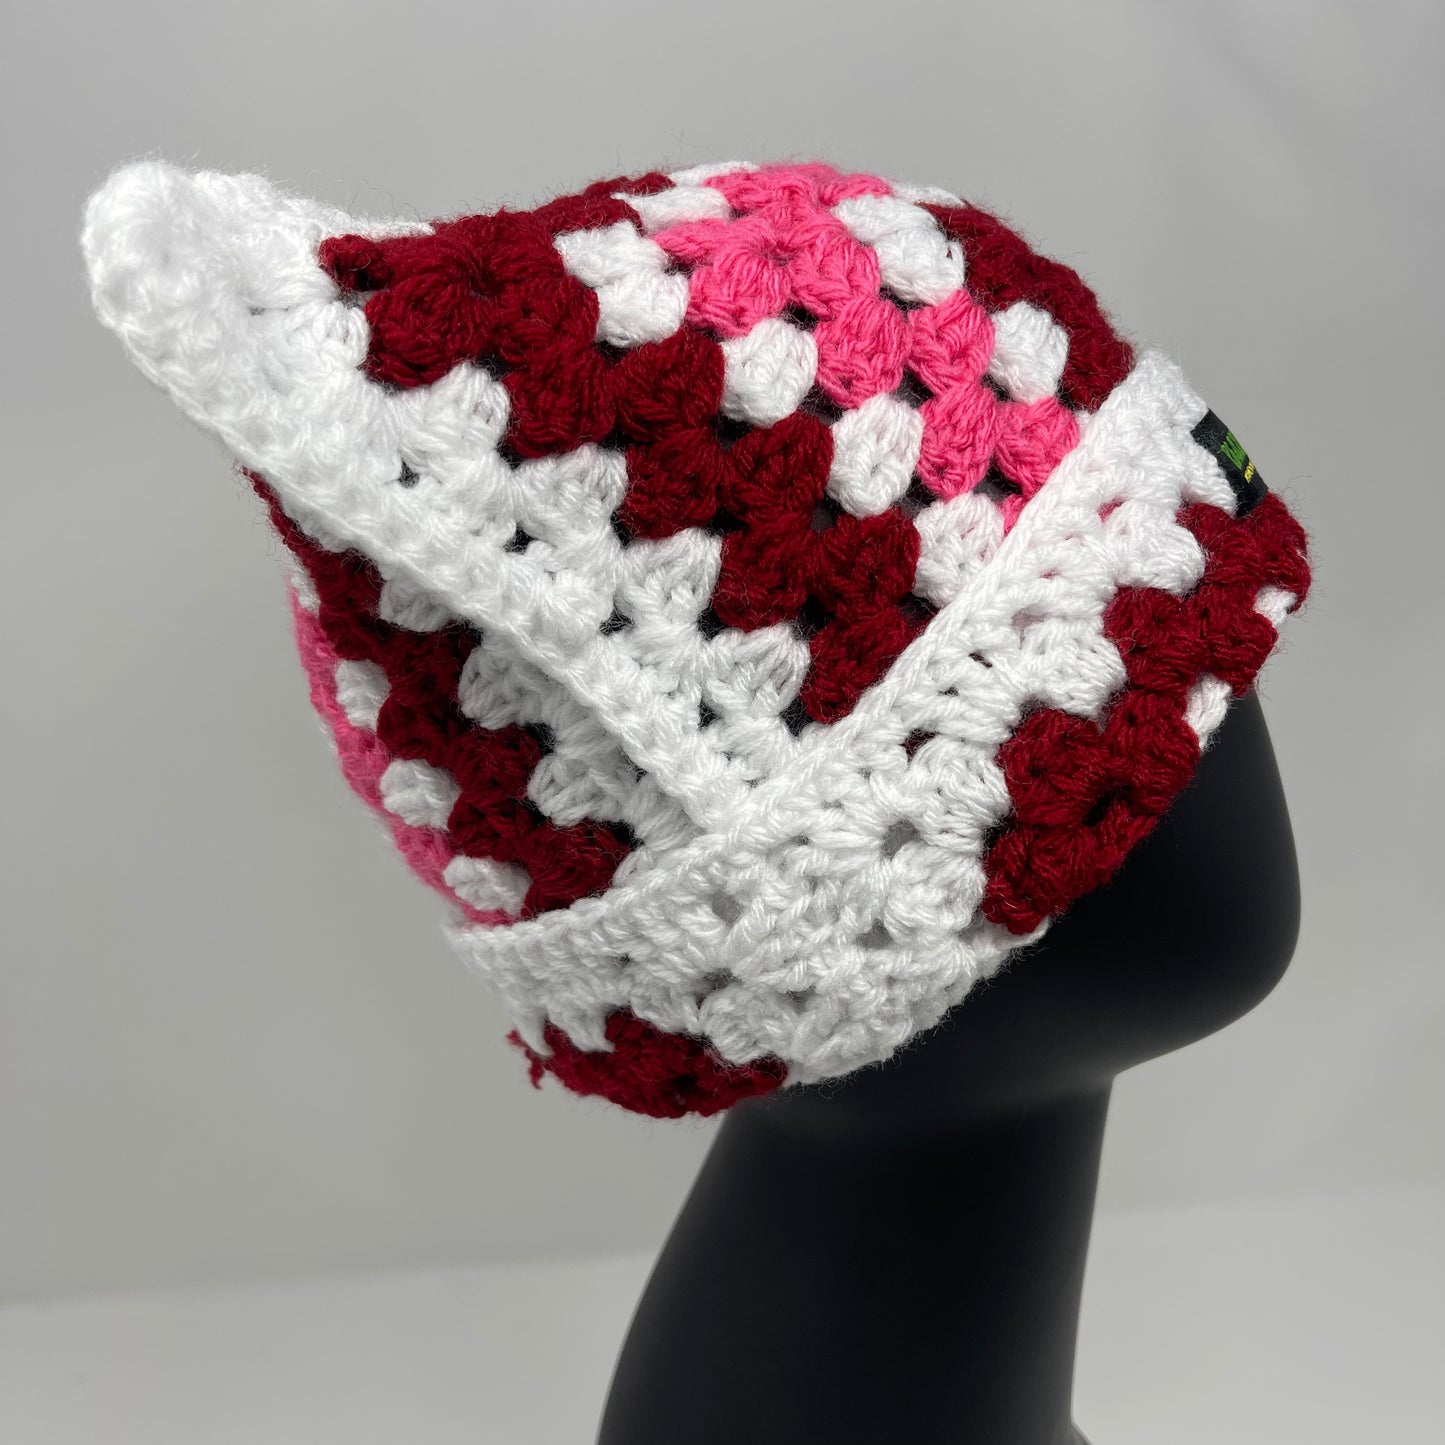 Crochet Cat Hat - White, Red, and Pink